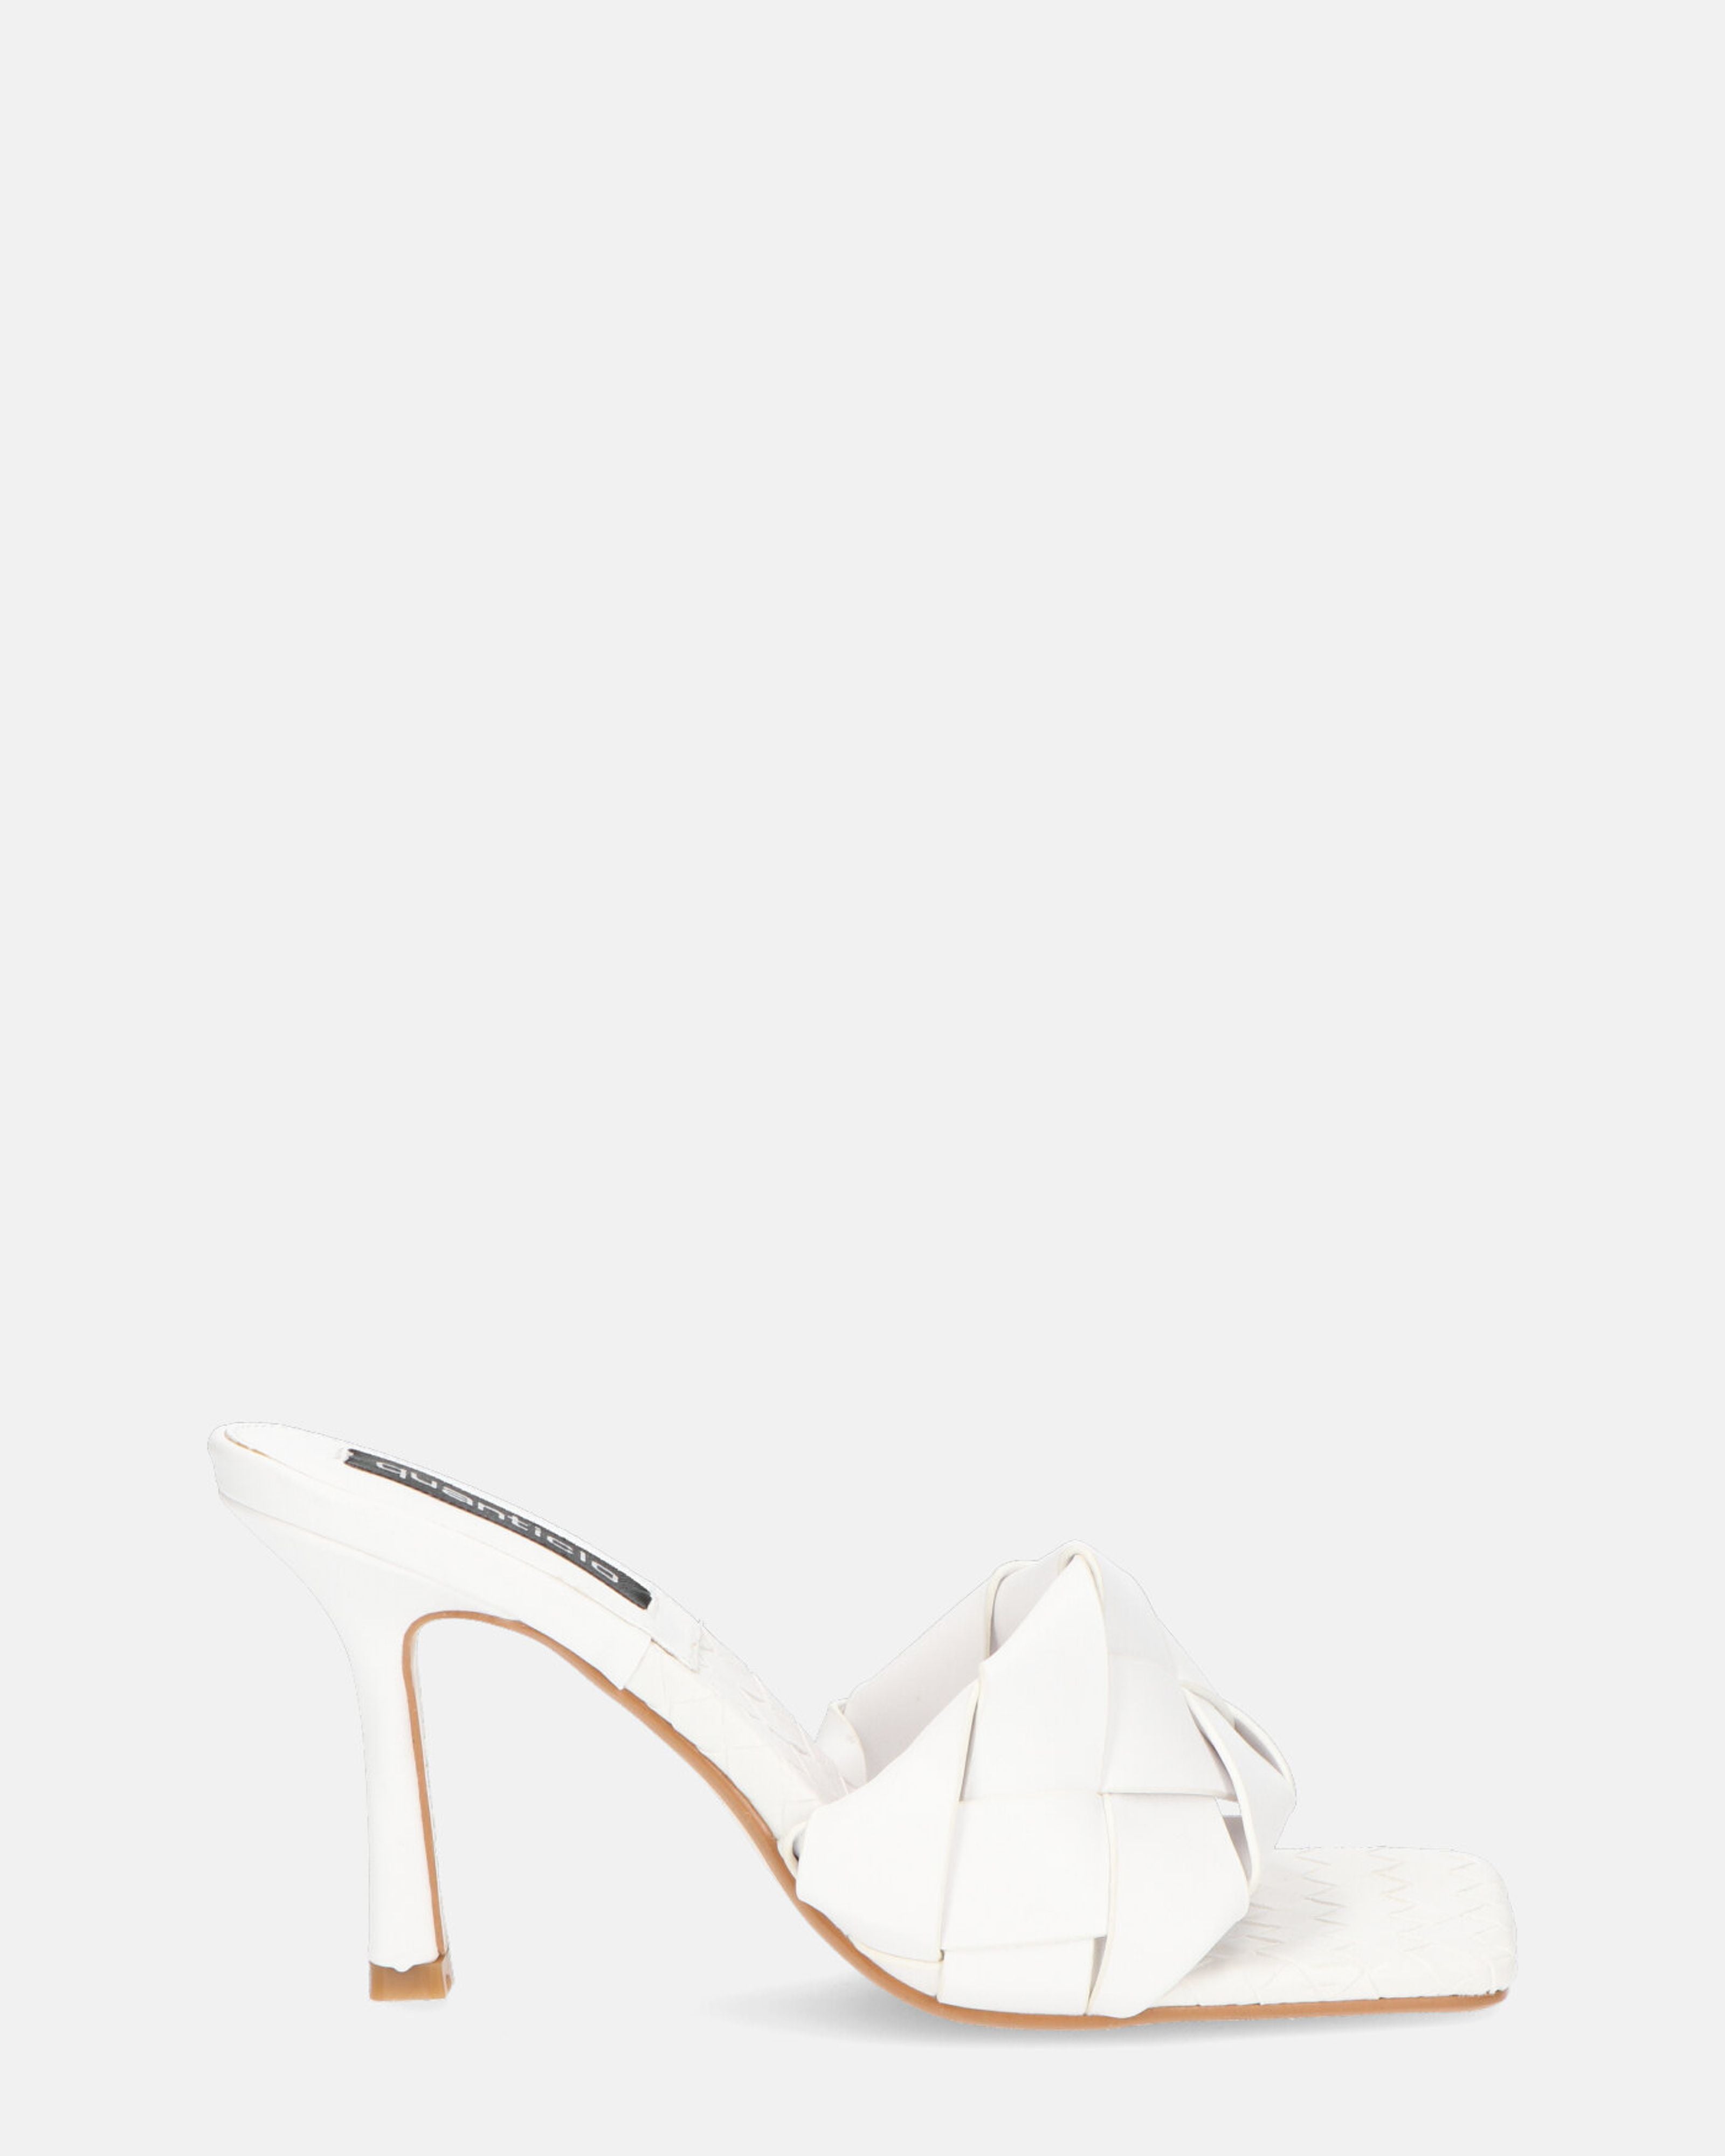 ENRICA - sandal in white woven leather with heel